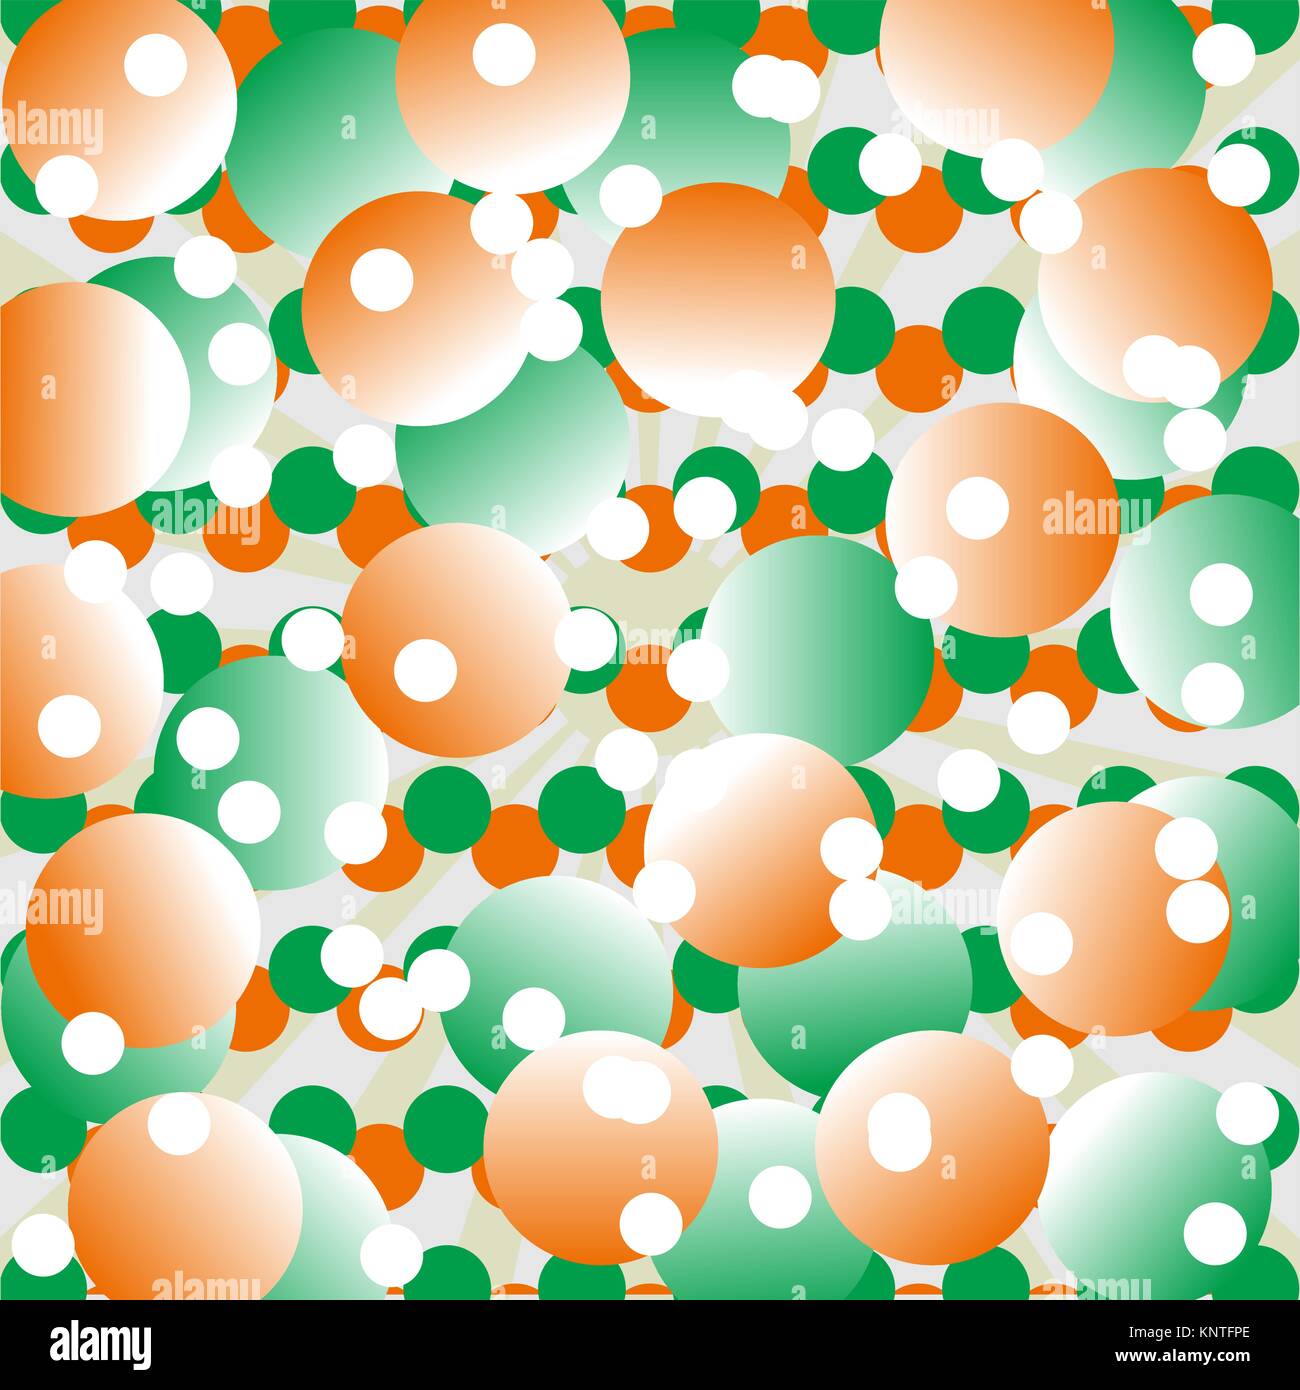 Pattern of orange and green circles Stock Vector